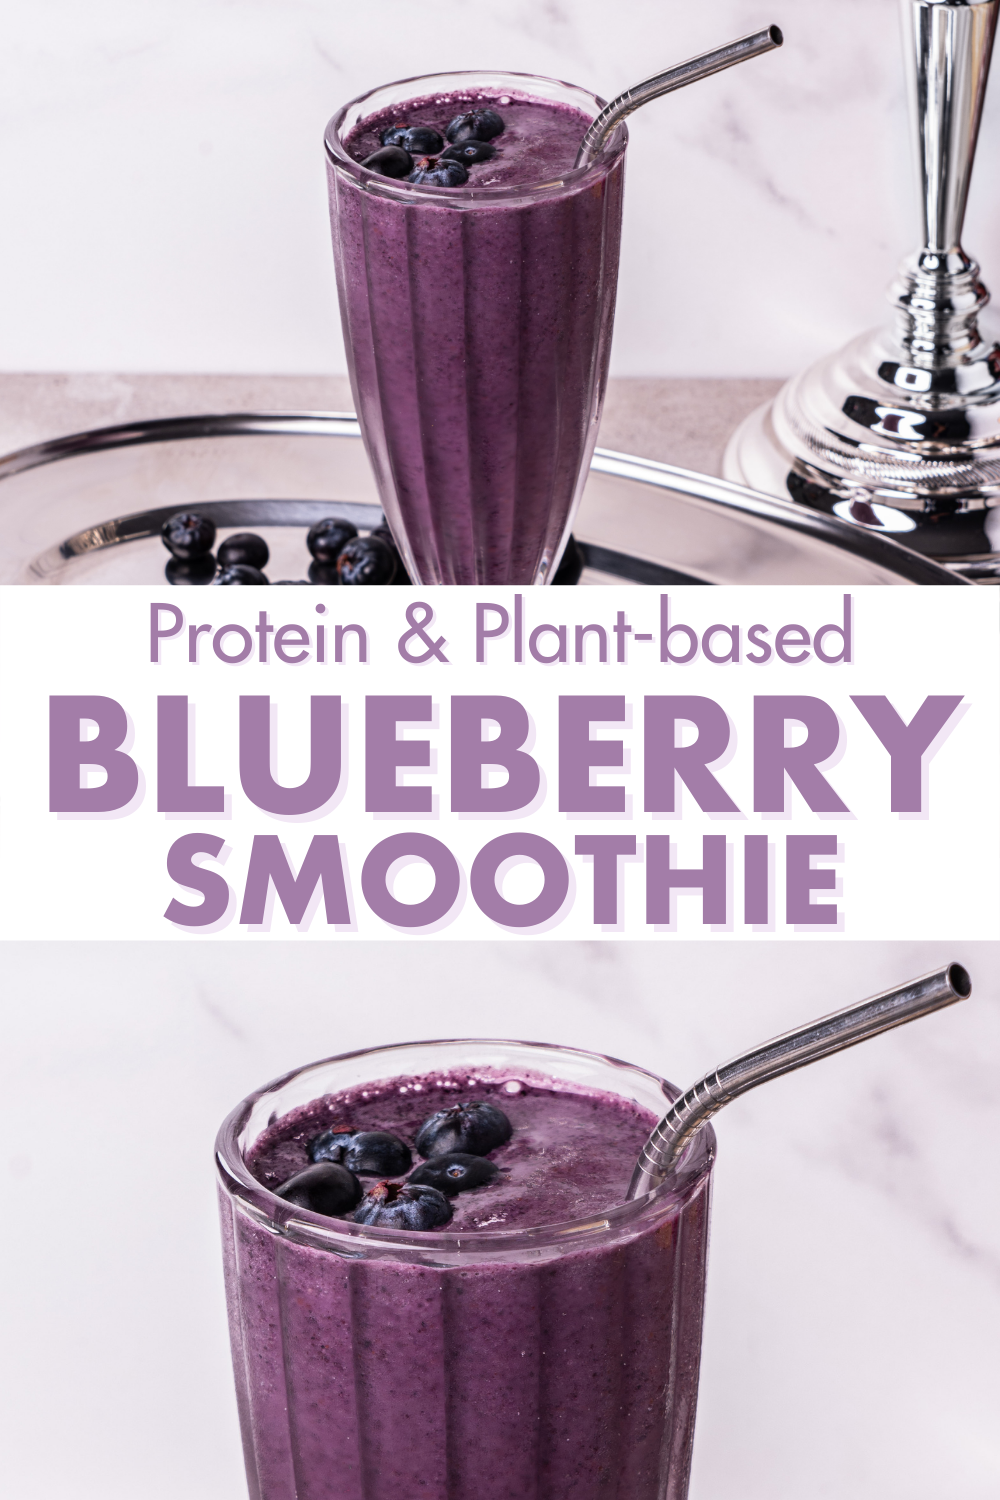 Blessed Blueberry Smoothie-EHPlabs